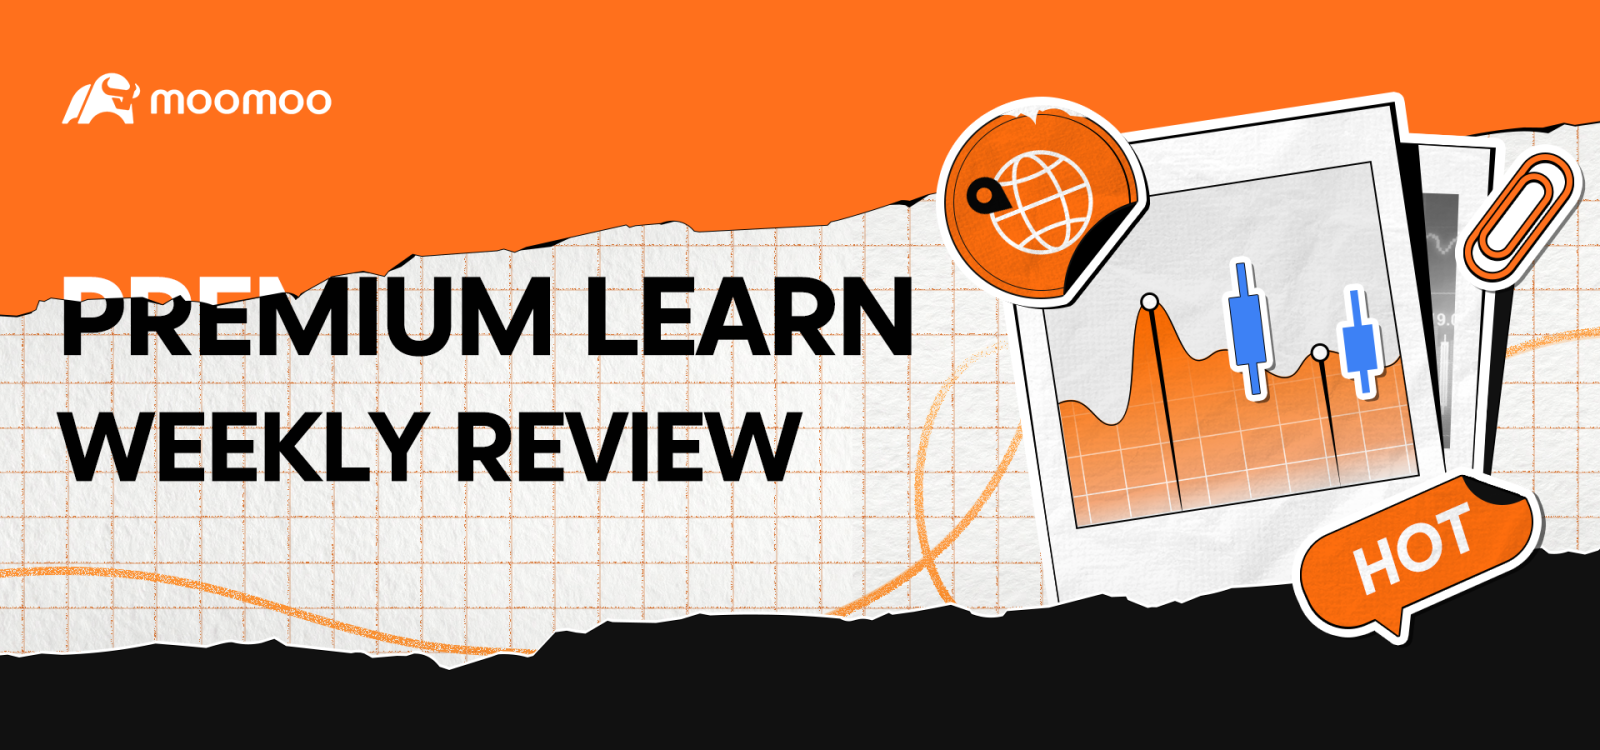 Premium Learn review: As August wraps up, what message do we take away from it?